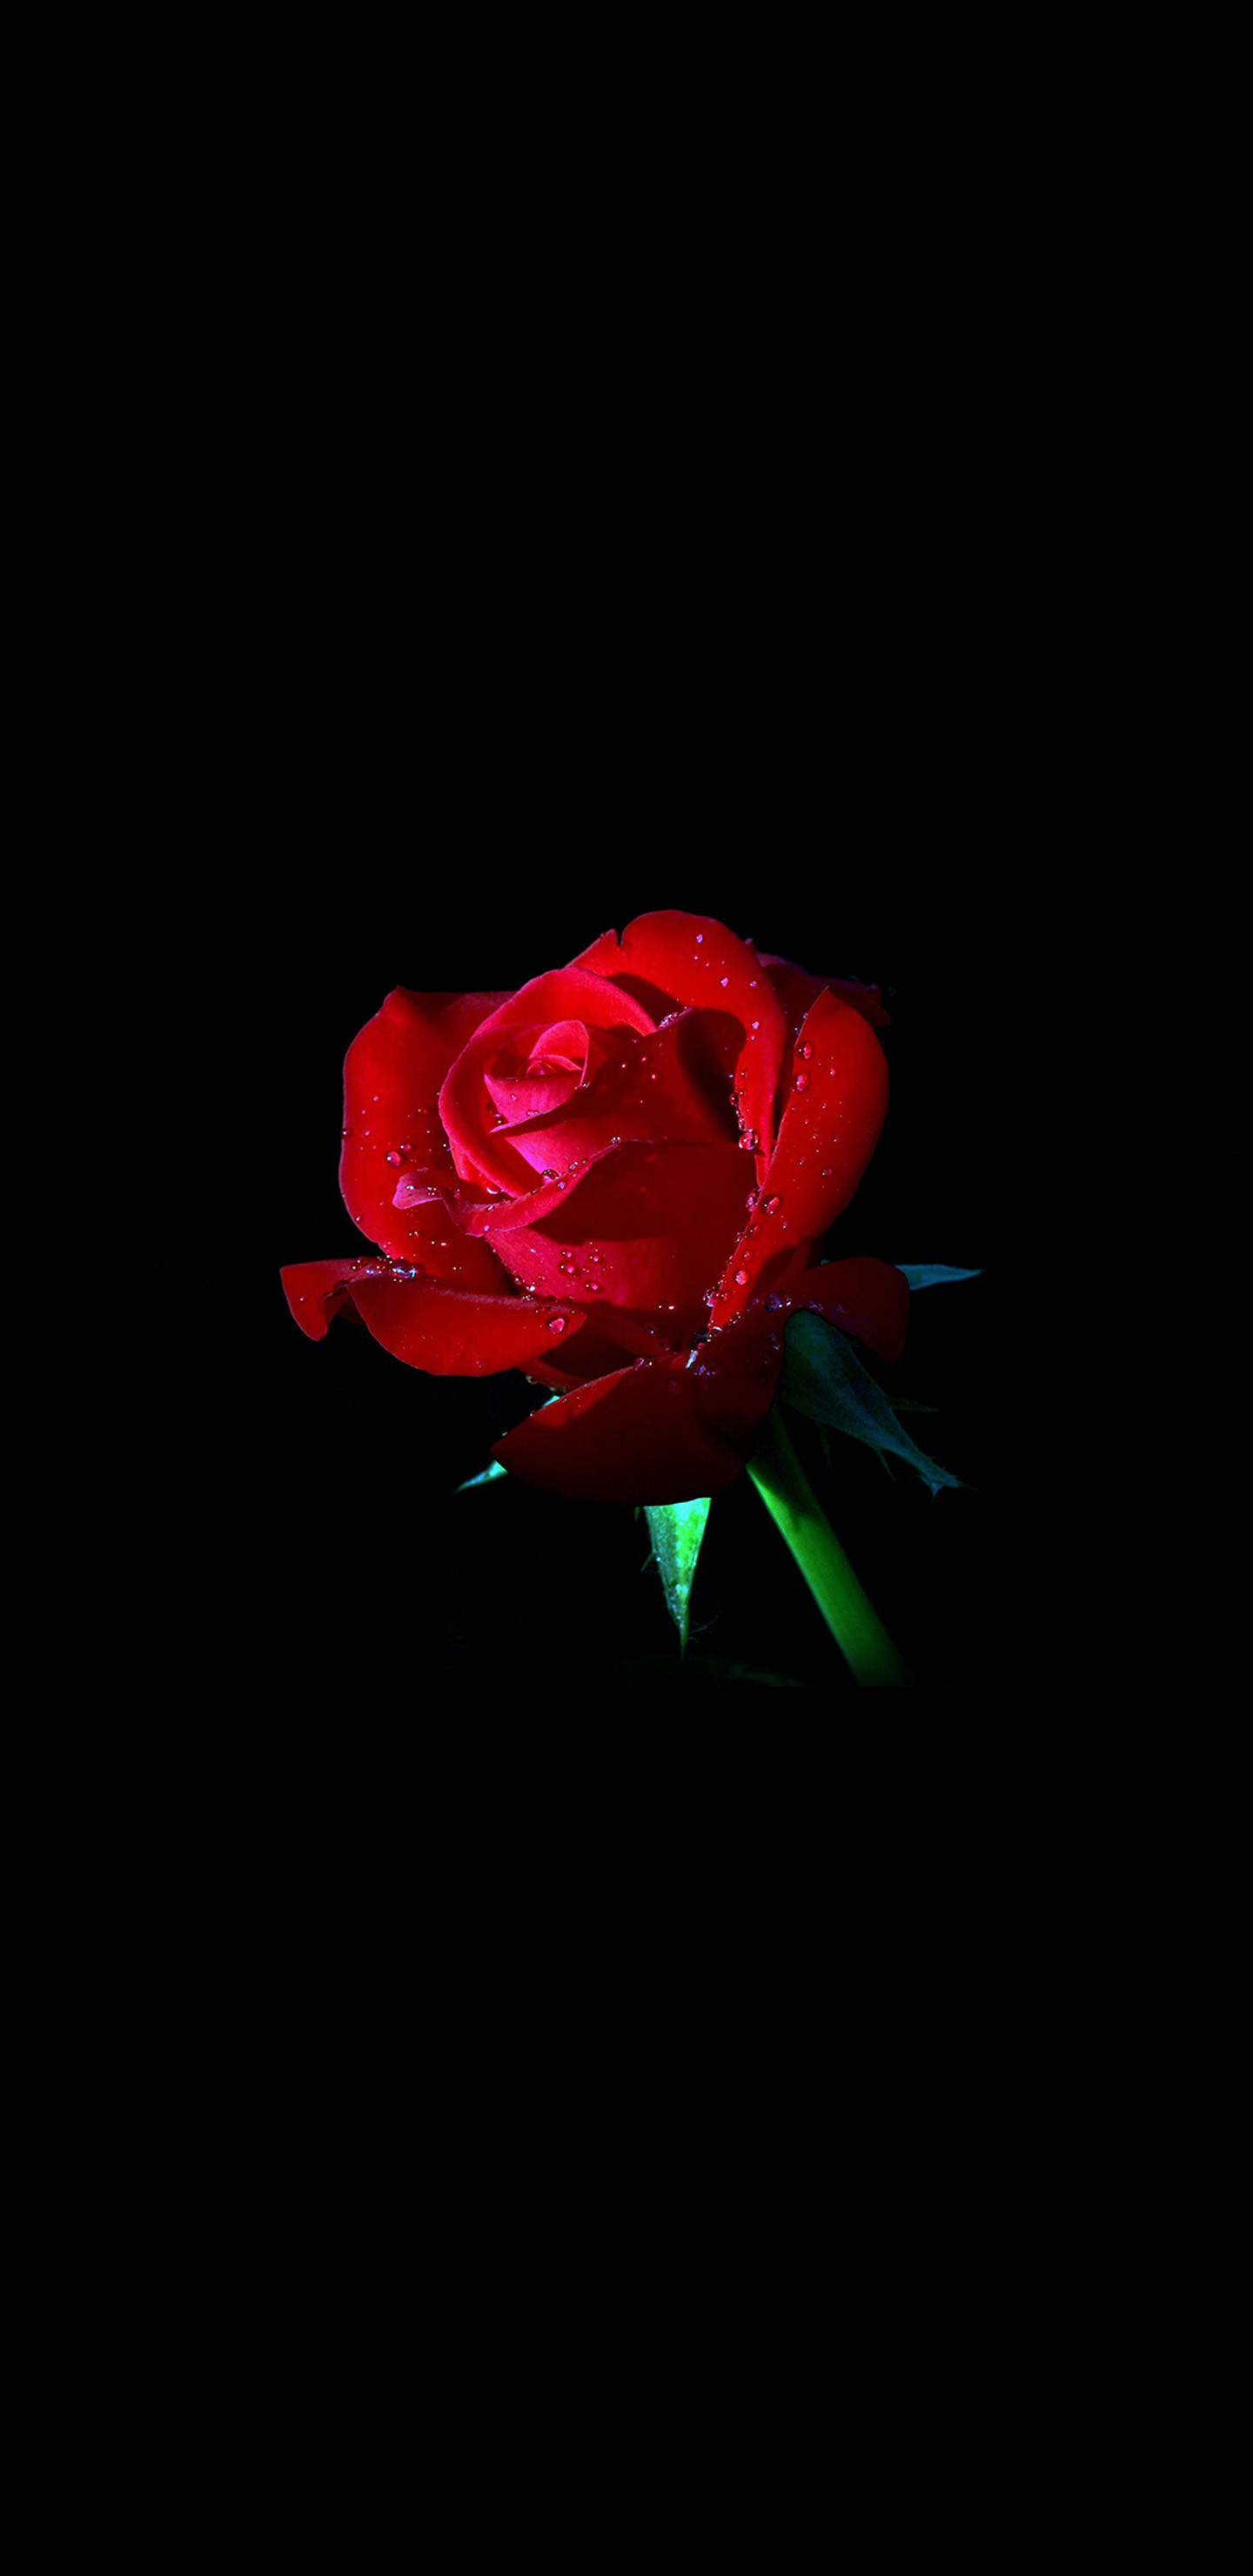 1440x2960 Pictures Red Roses Box Flowers Black background 1920x1200 Â· 1920x1200  Pictures Red Roses Box Flowers Black background 1920x1200